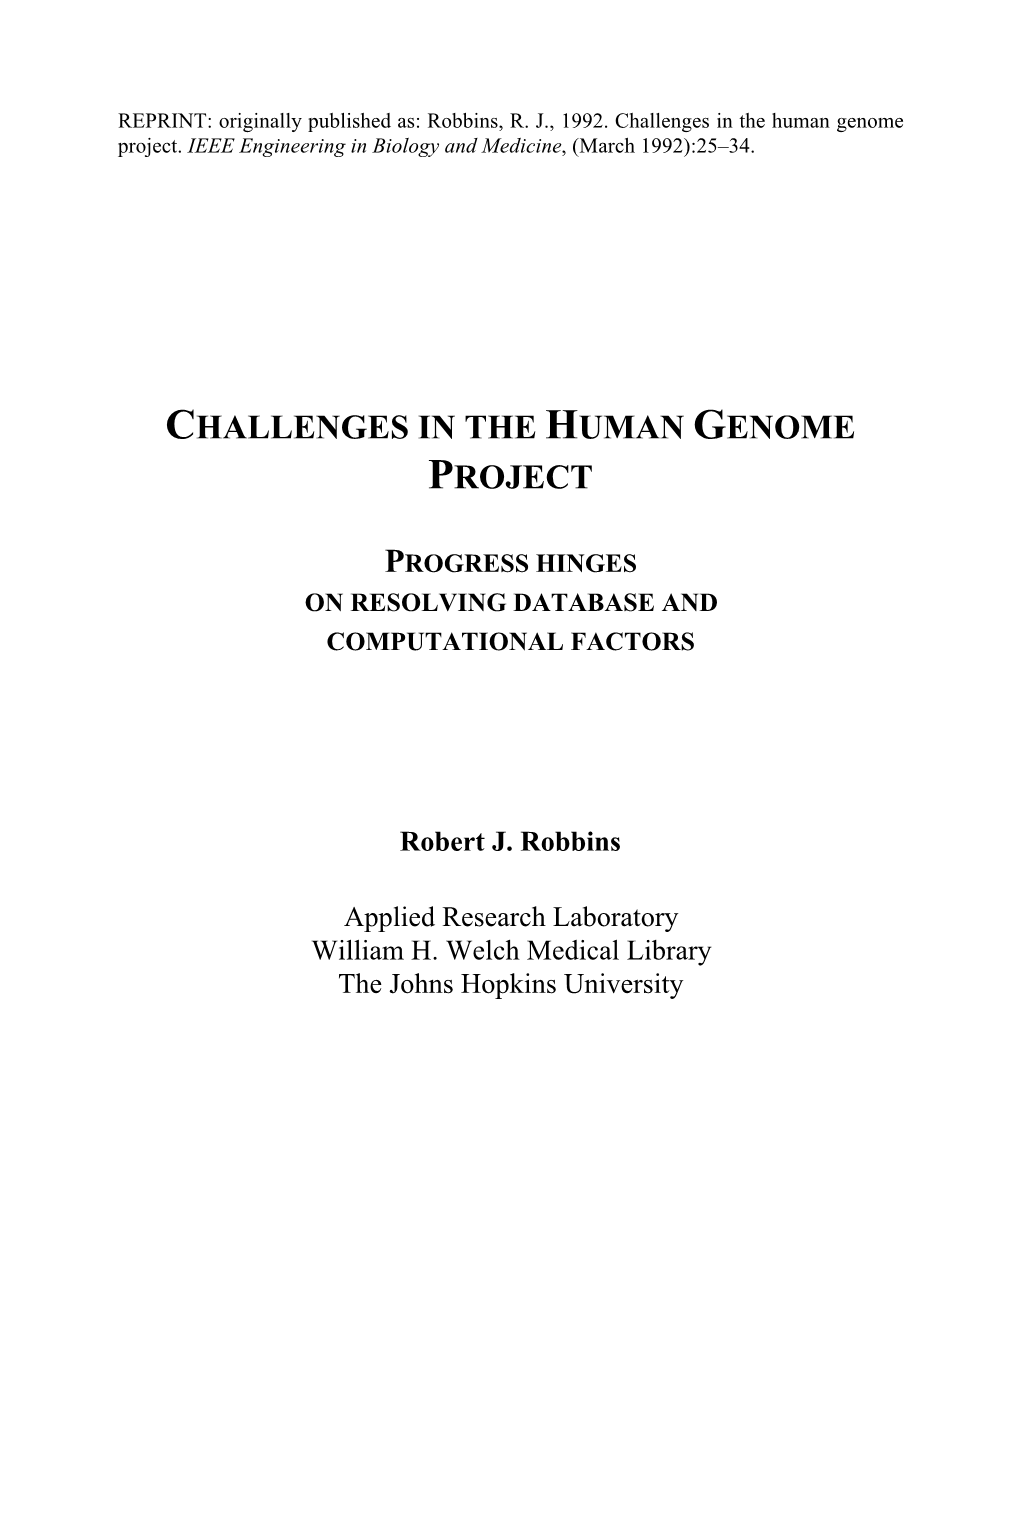 Challenges in the Human Genome Project